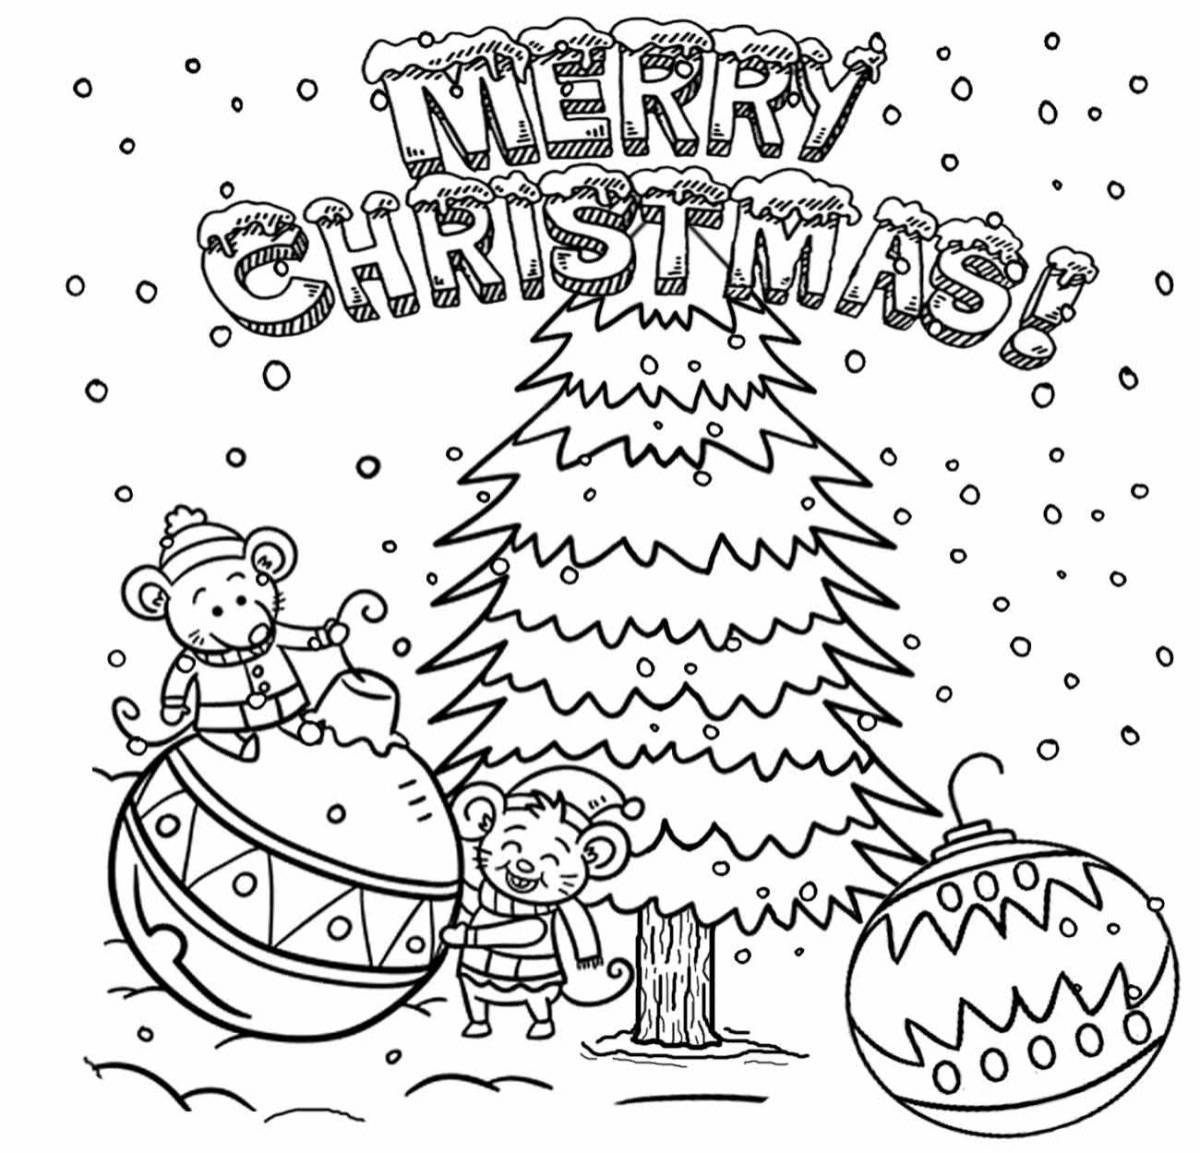 Colorful Christmas coloring card